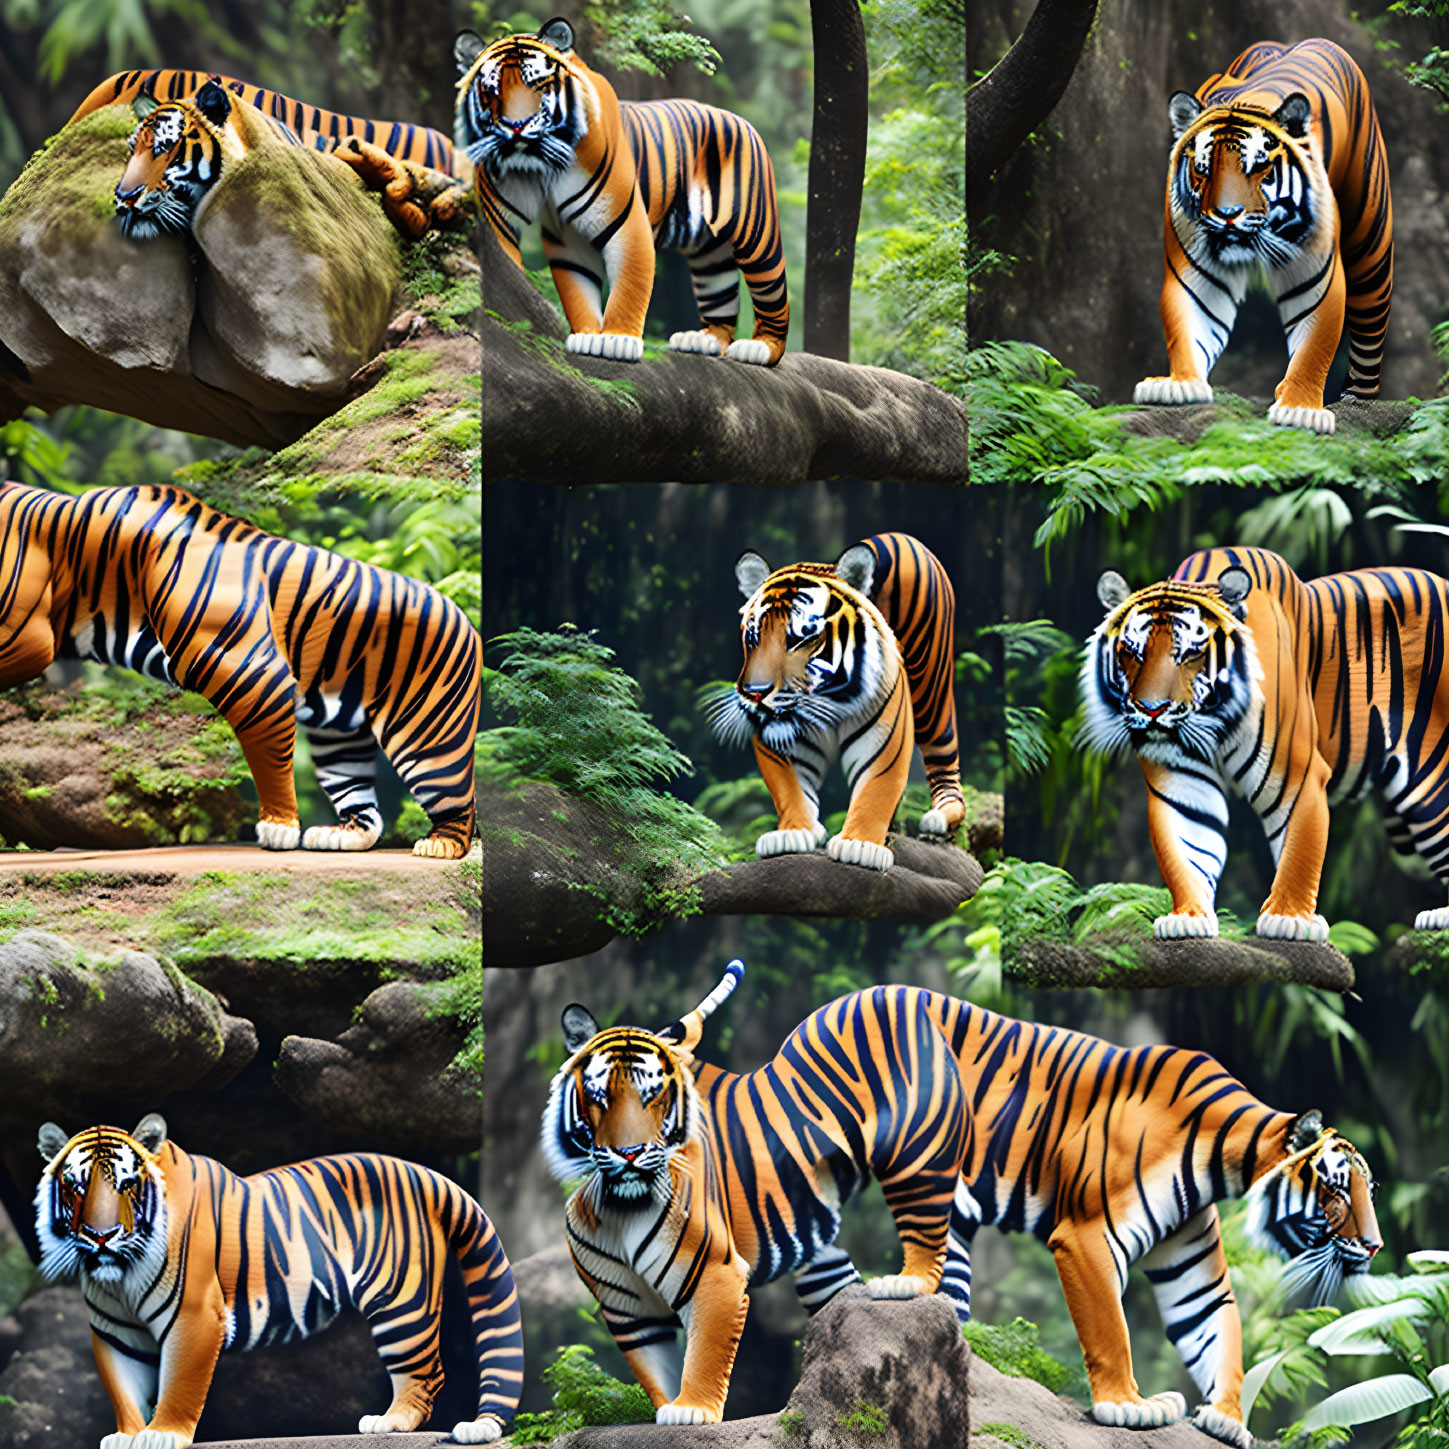 Bengal tiger in lush green forest with nine poses among rocks and foliage